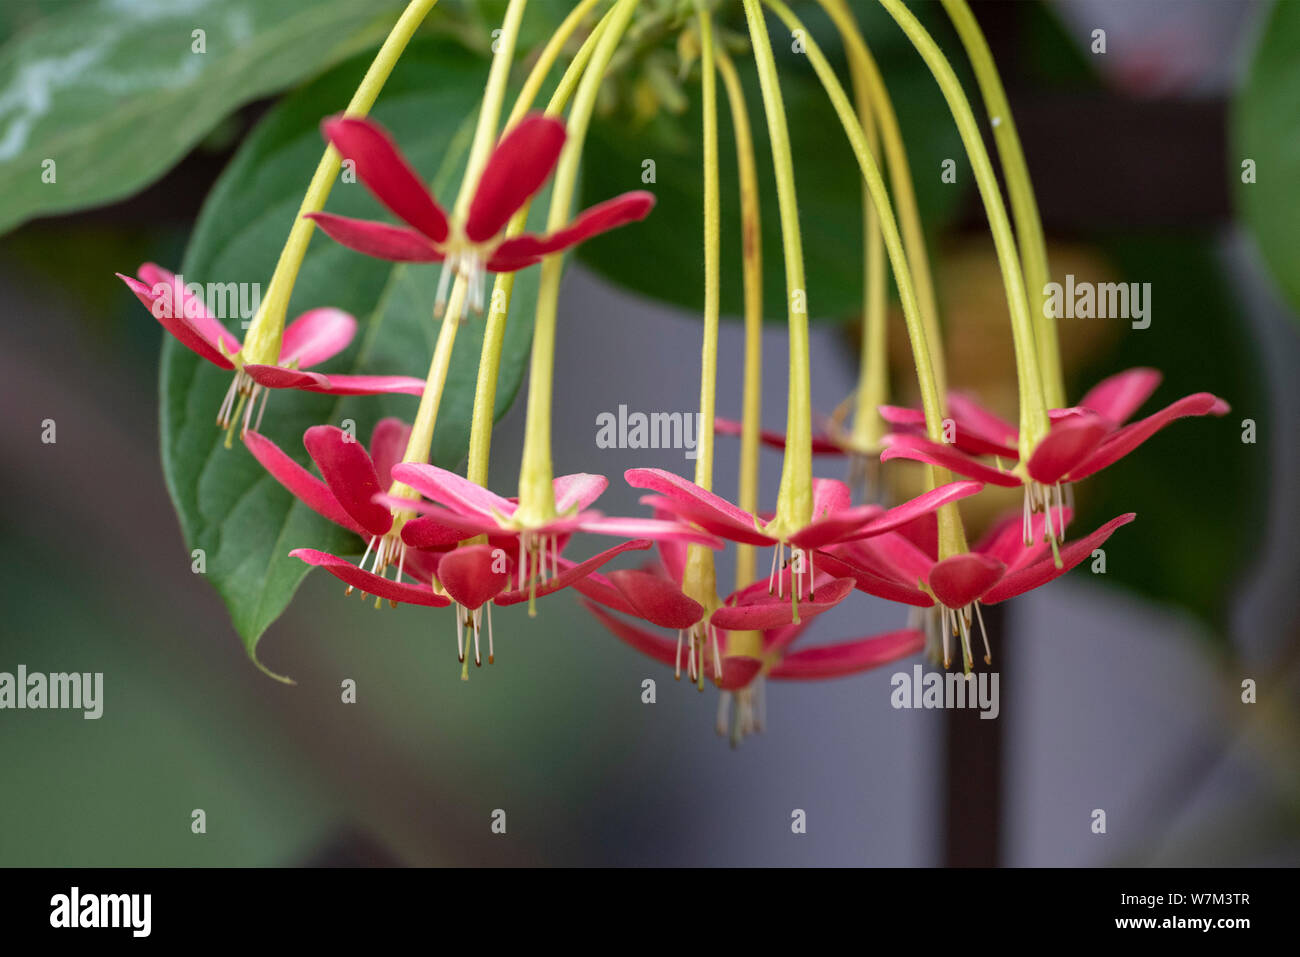 Quiskwalis Indian (lat.uisqualis indica) - flowers close-up in natural light. Thailand. Stock Photo